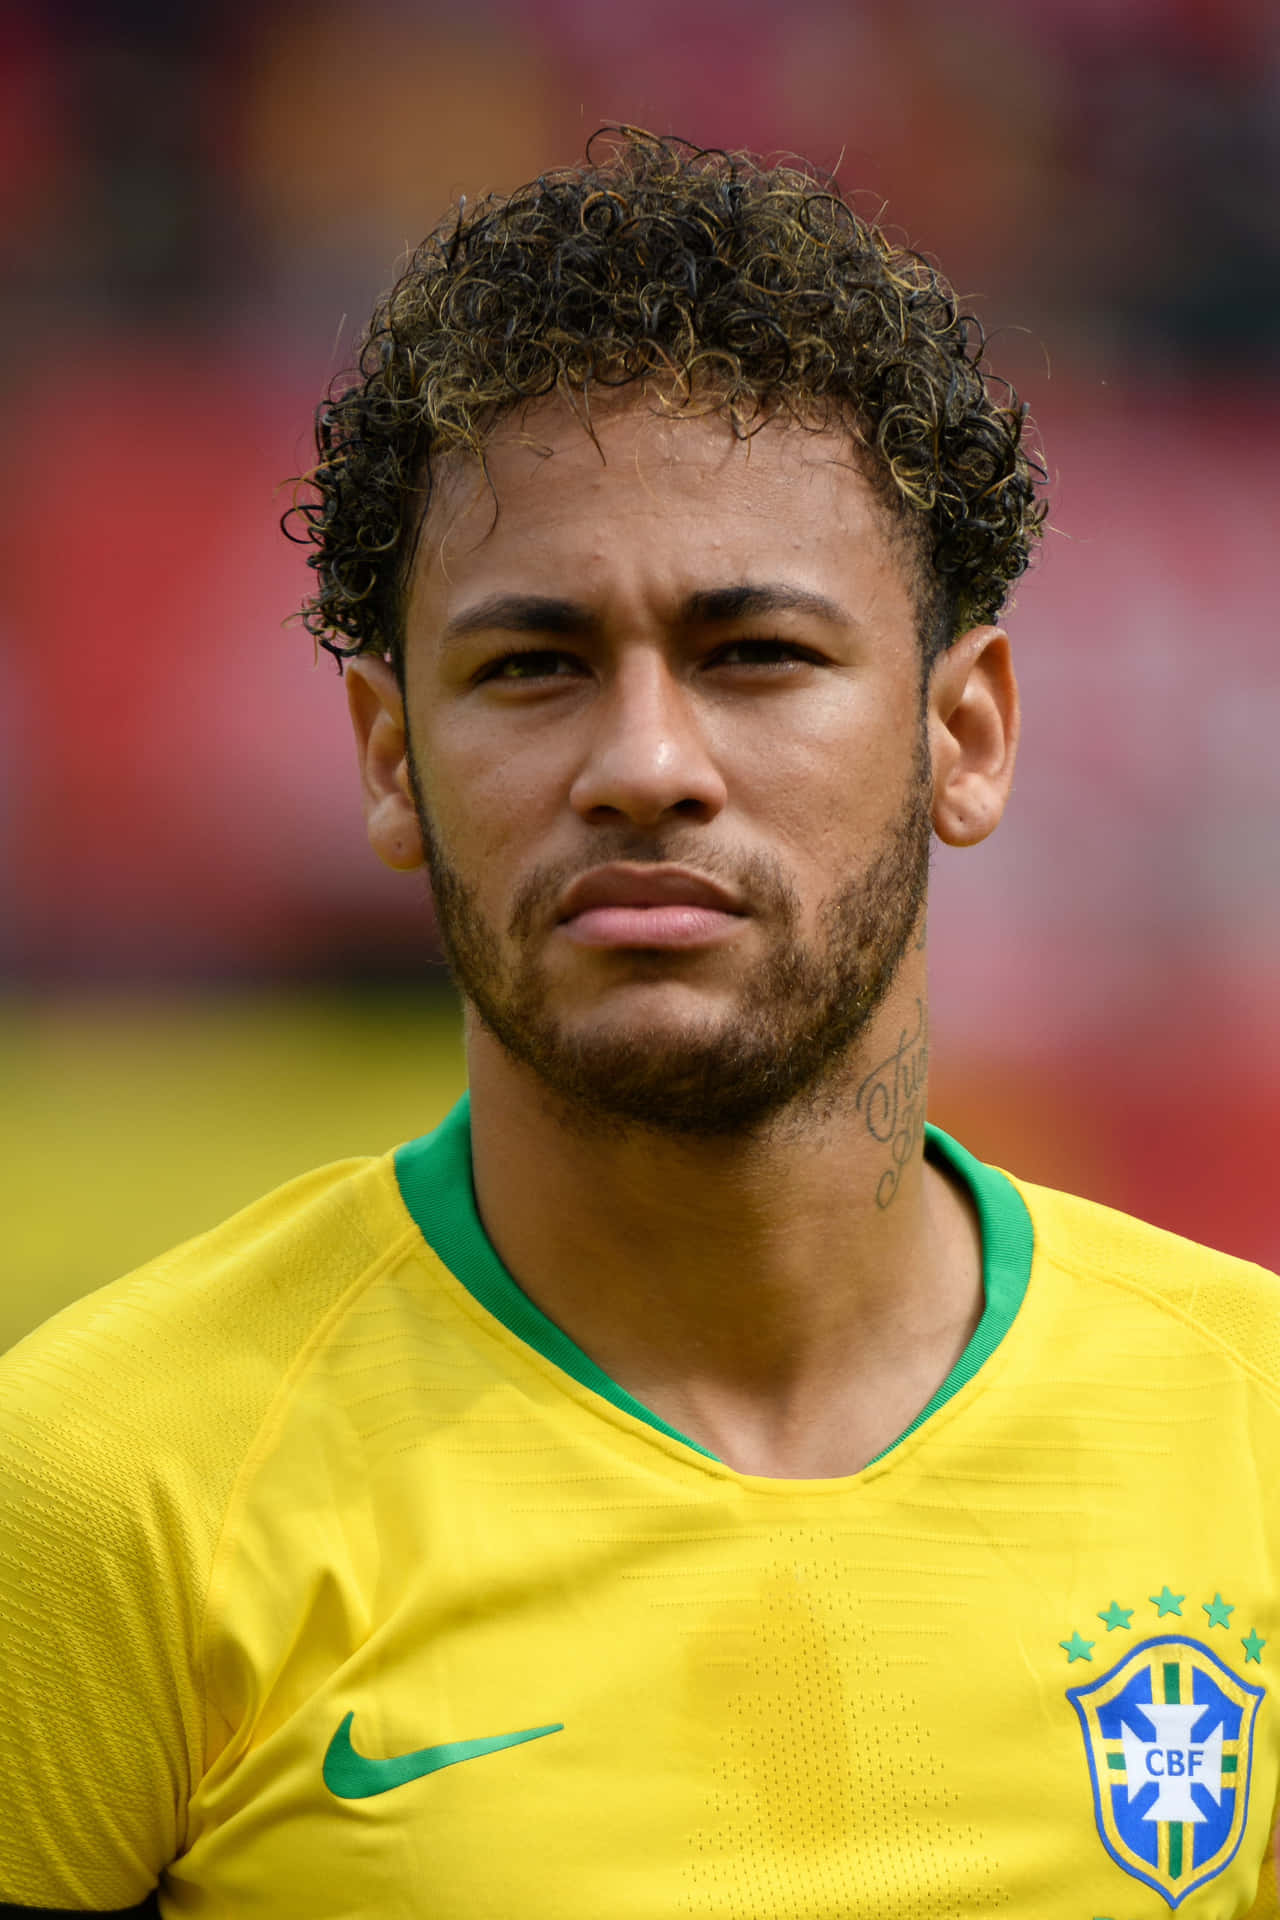 Neymar Jr In Action During A Game